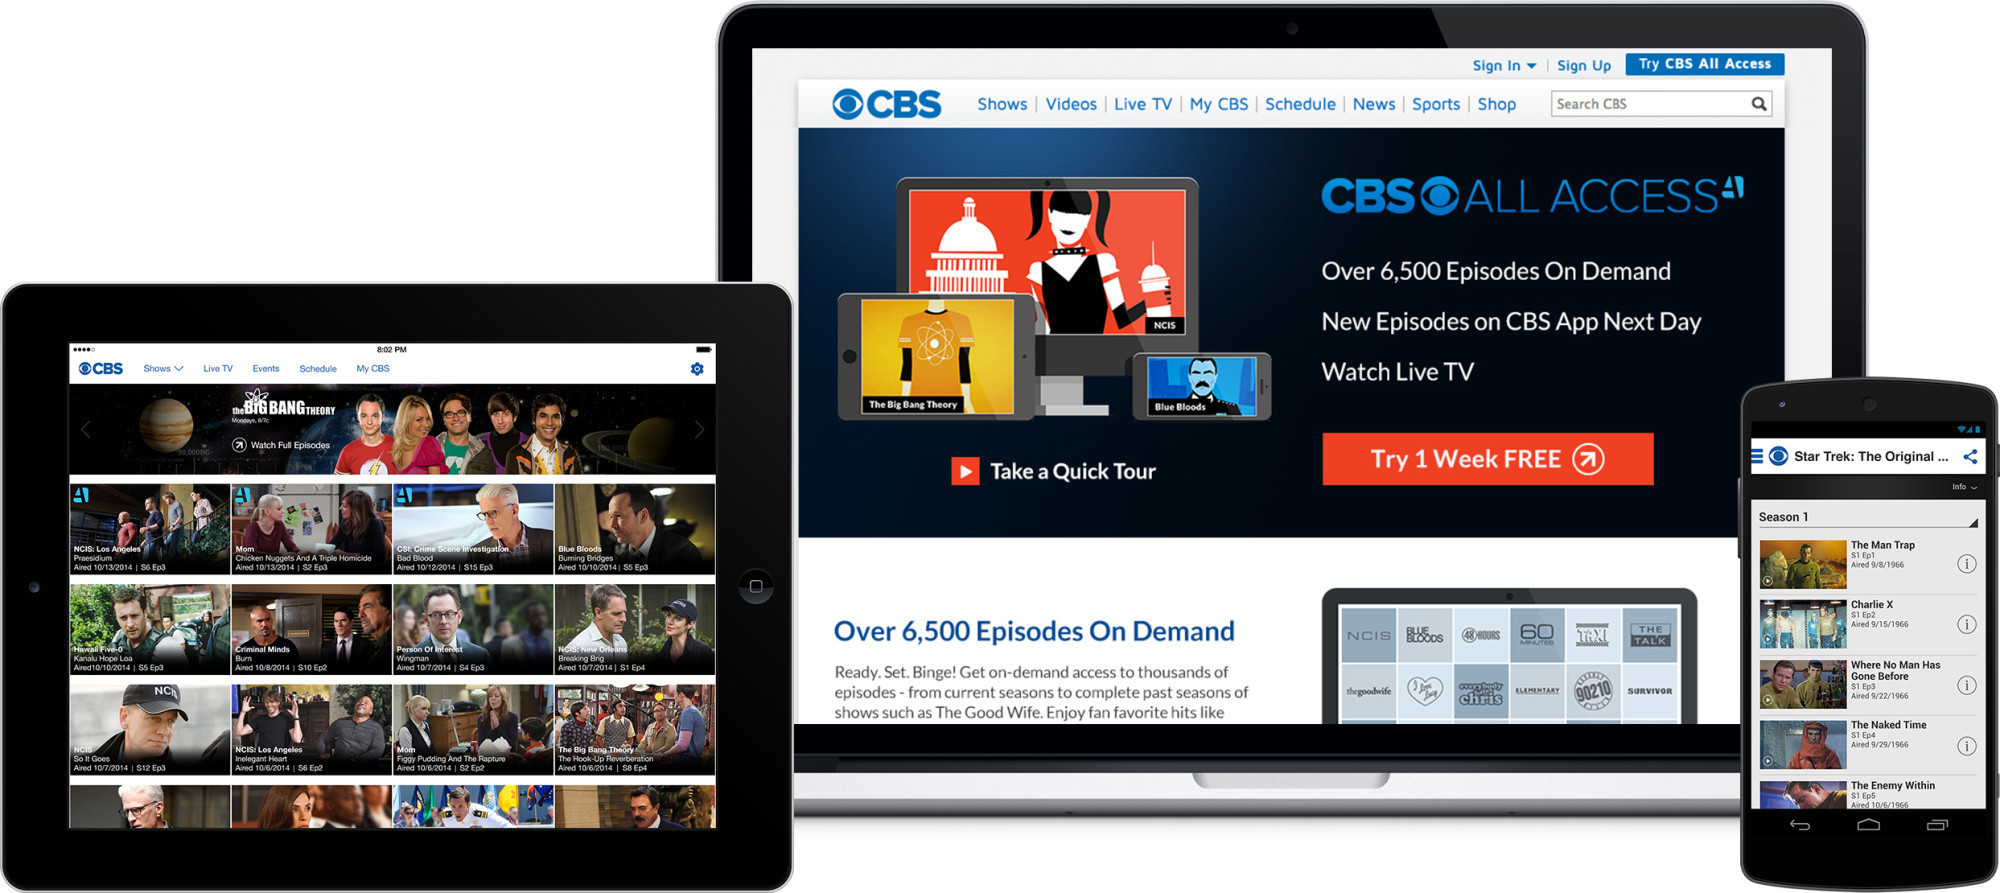 CBS joins HBO in chase for cord-cutters - LA Times2000 x 893